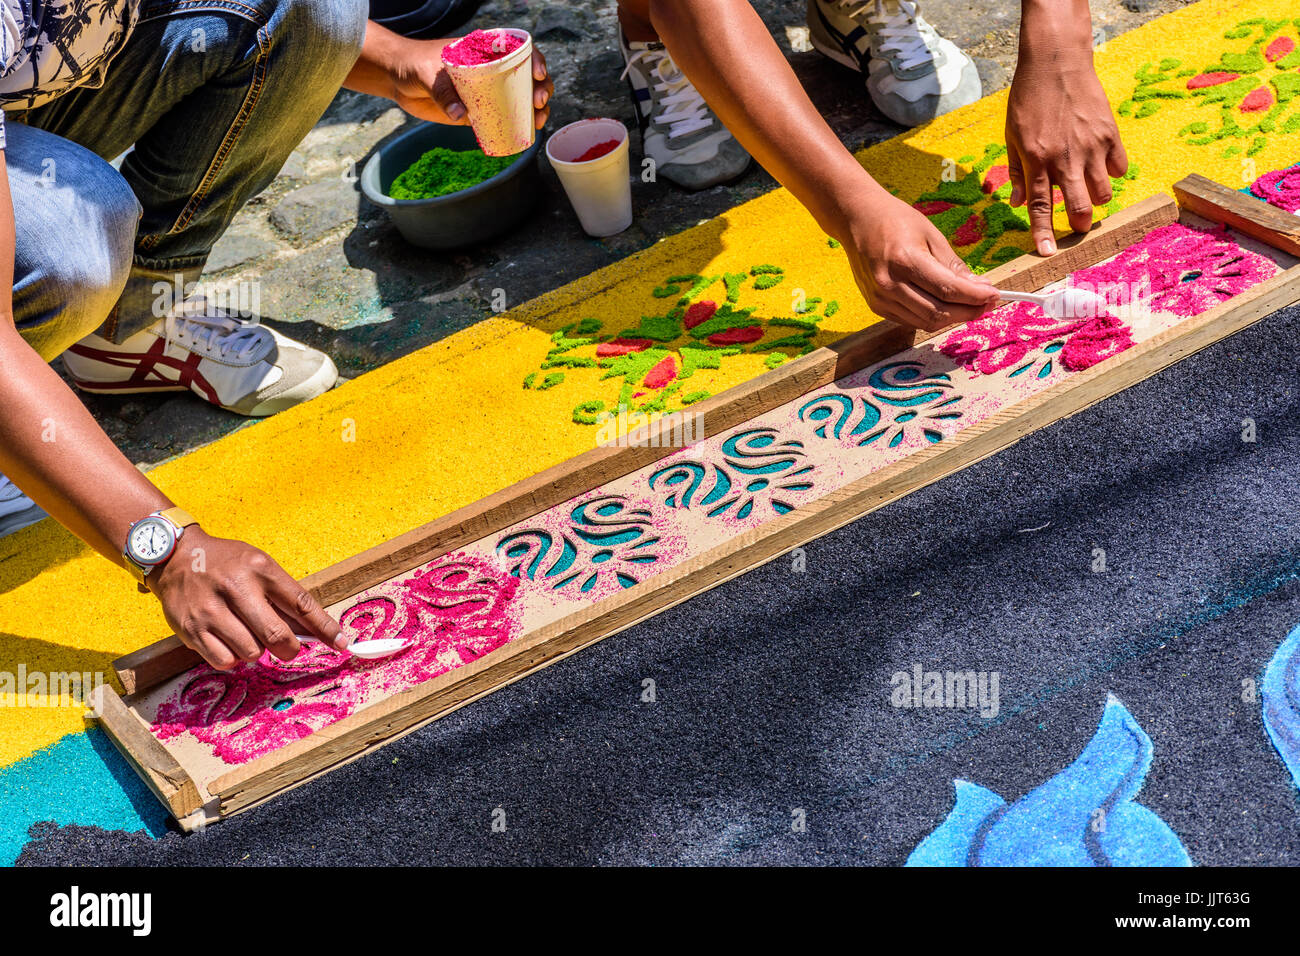 Antigua, Guatemala -  March 26, 2017: Locals spoon dyed sawdust through wooden stencil to decorate Lent carpet for procession Stock Photo